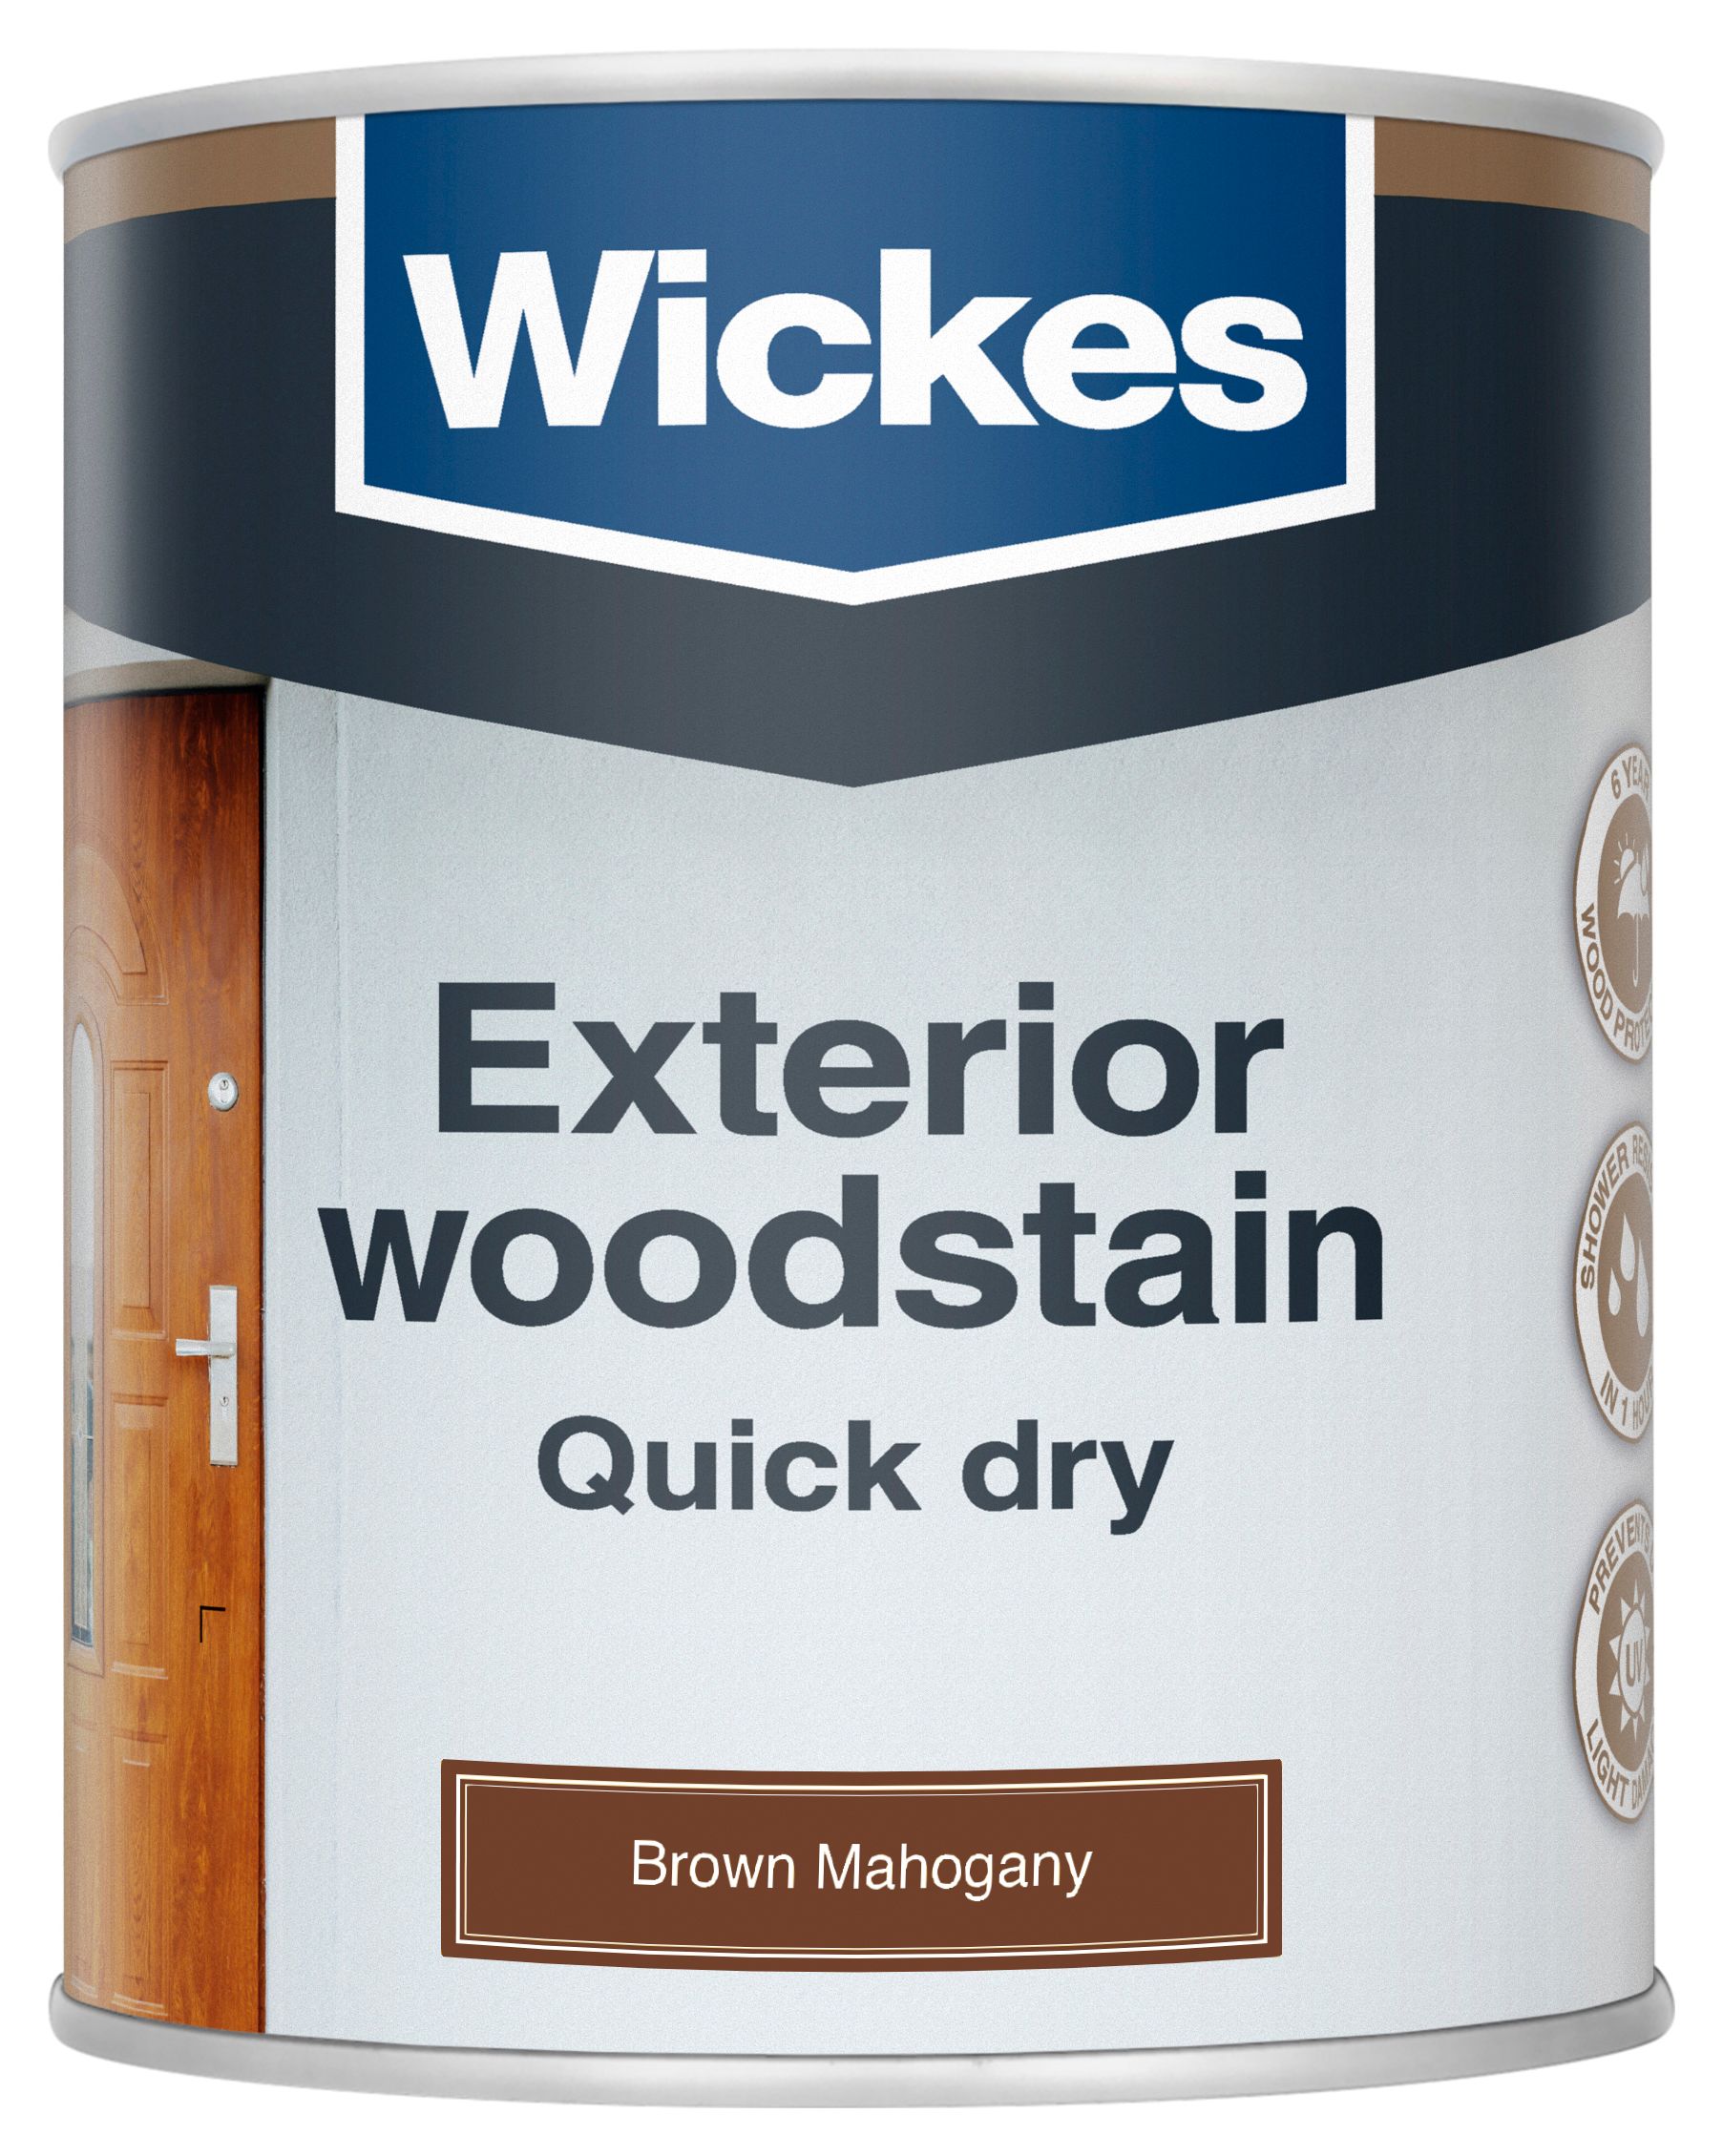 Image of Wickes Exterior Quick Dry Woodstain - Brown Mahogany - 750ml